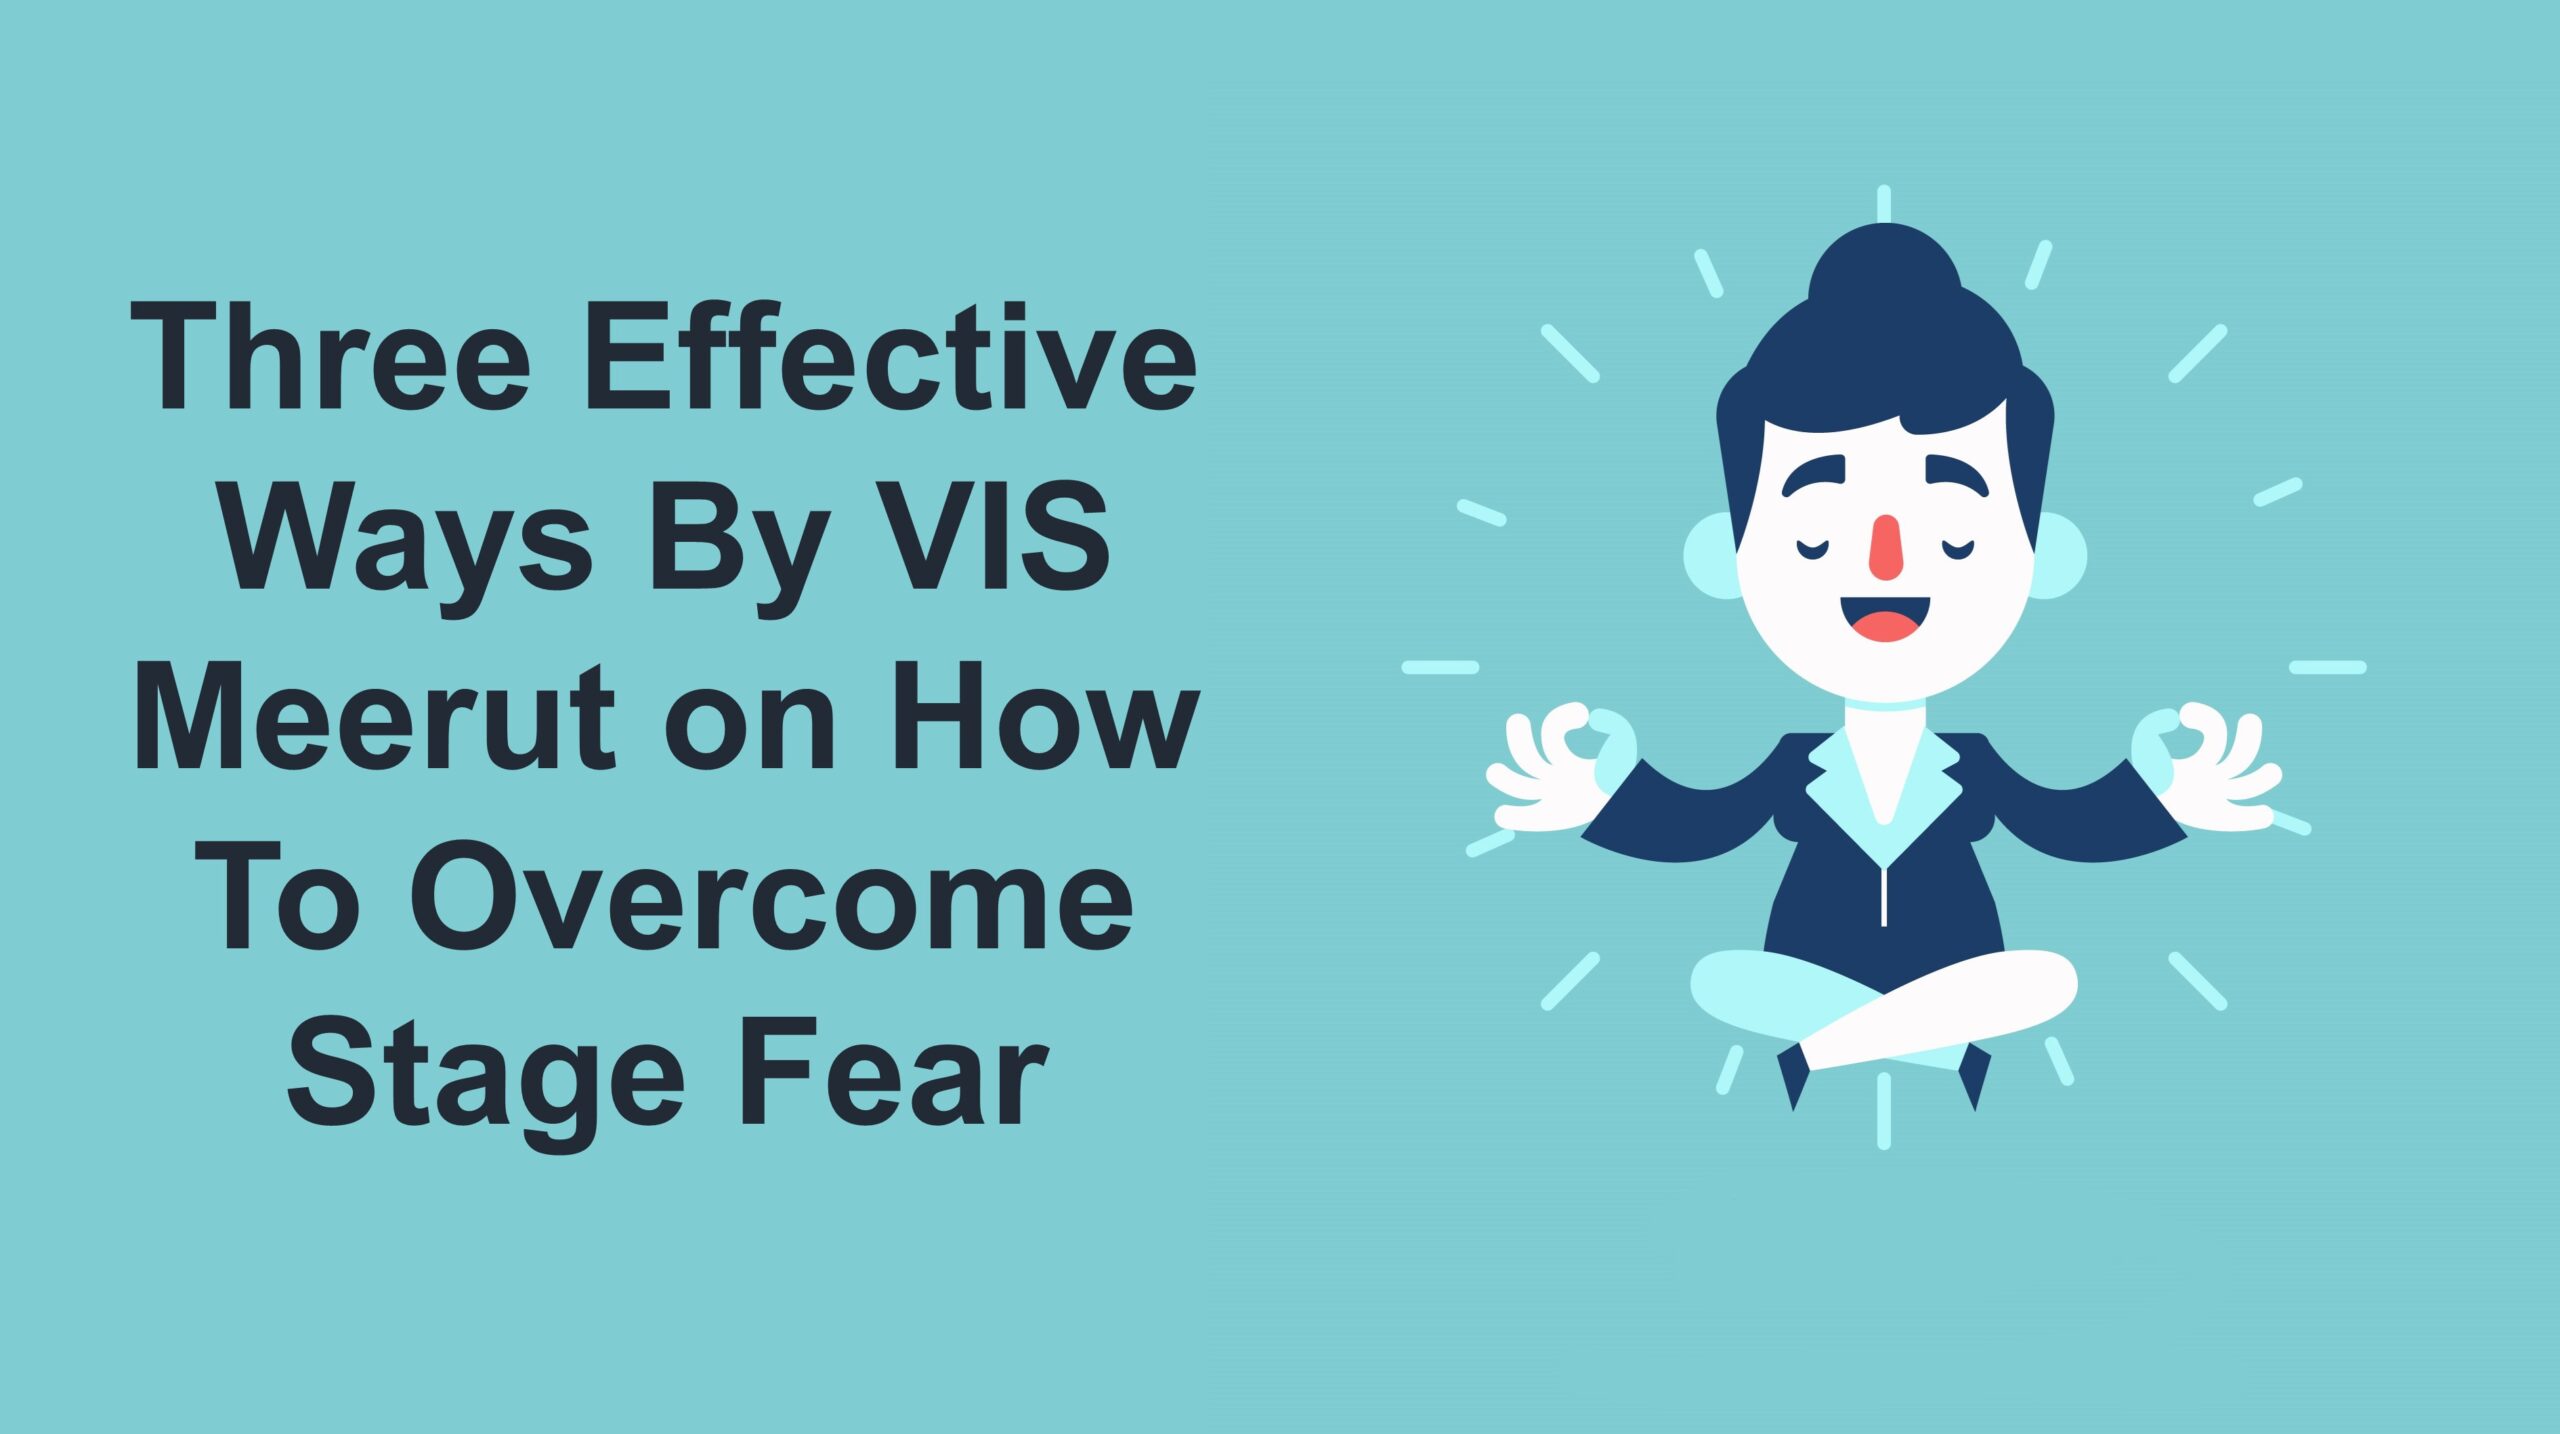 Three Effective Ways By VIS Meerut on How To Overcome Stage Fear